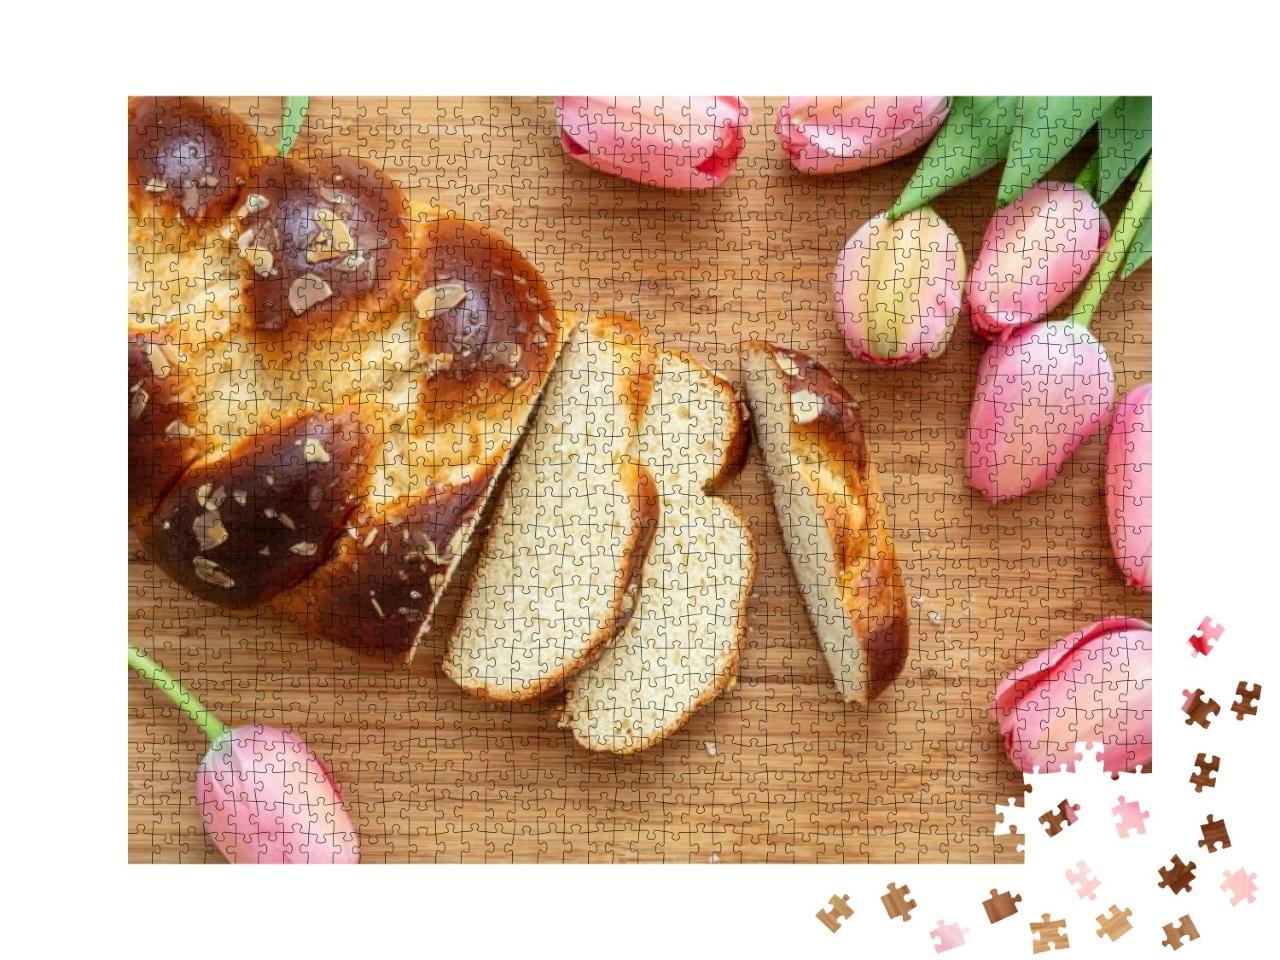 Easter Sweet Bread, Tsoureki Cozonac Sliced on Wood Table... Jigsaw Puzzle with 1000 pieces